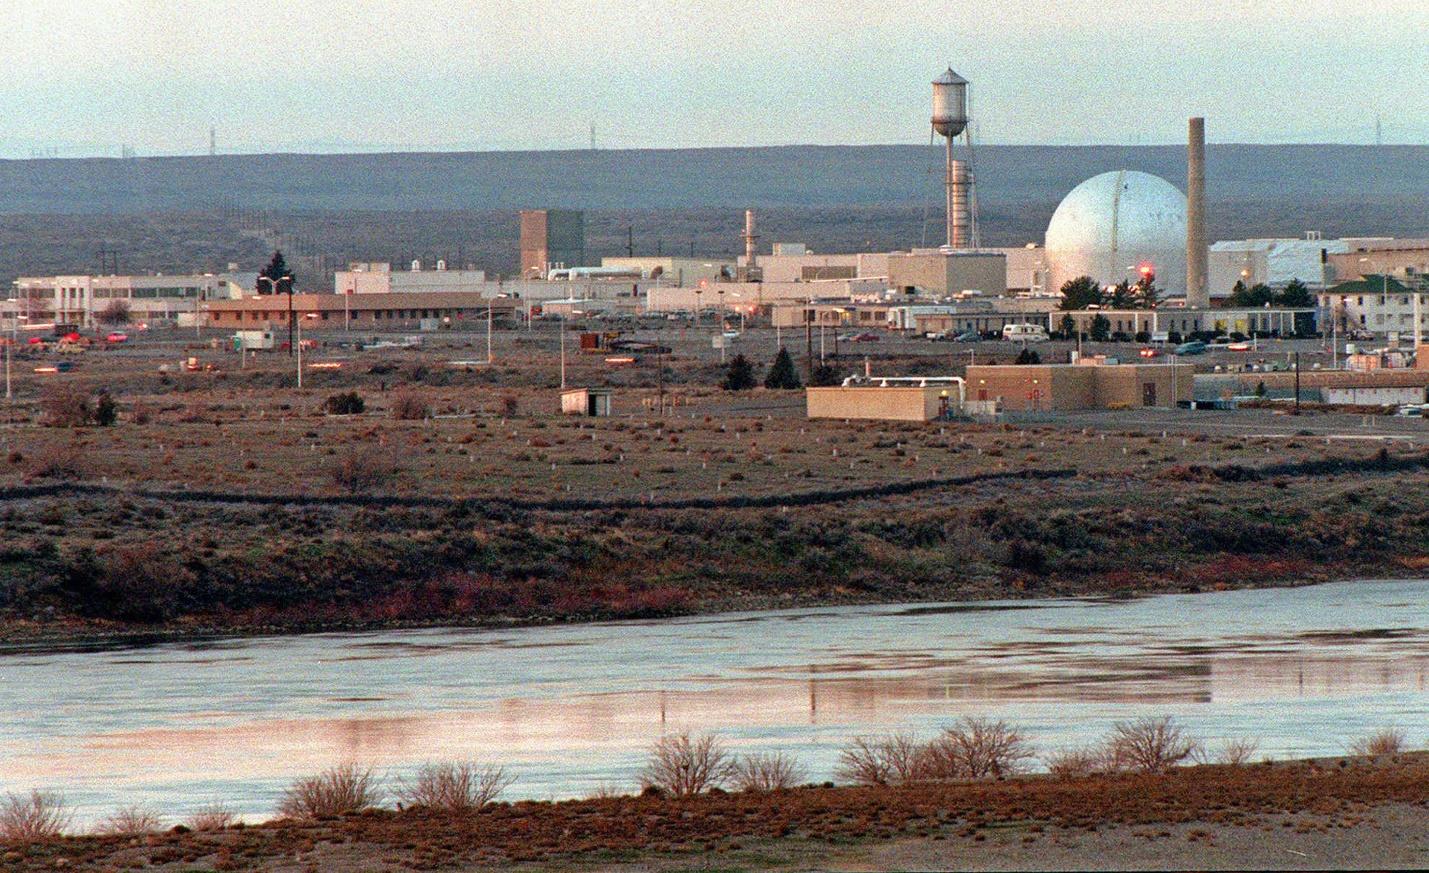 A wide view of a landscape featuring the Hanford nuclear site.